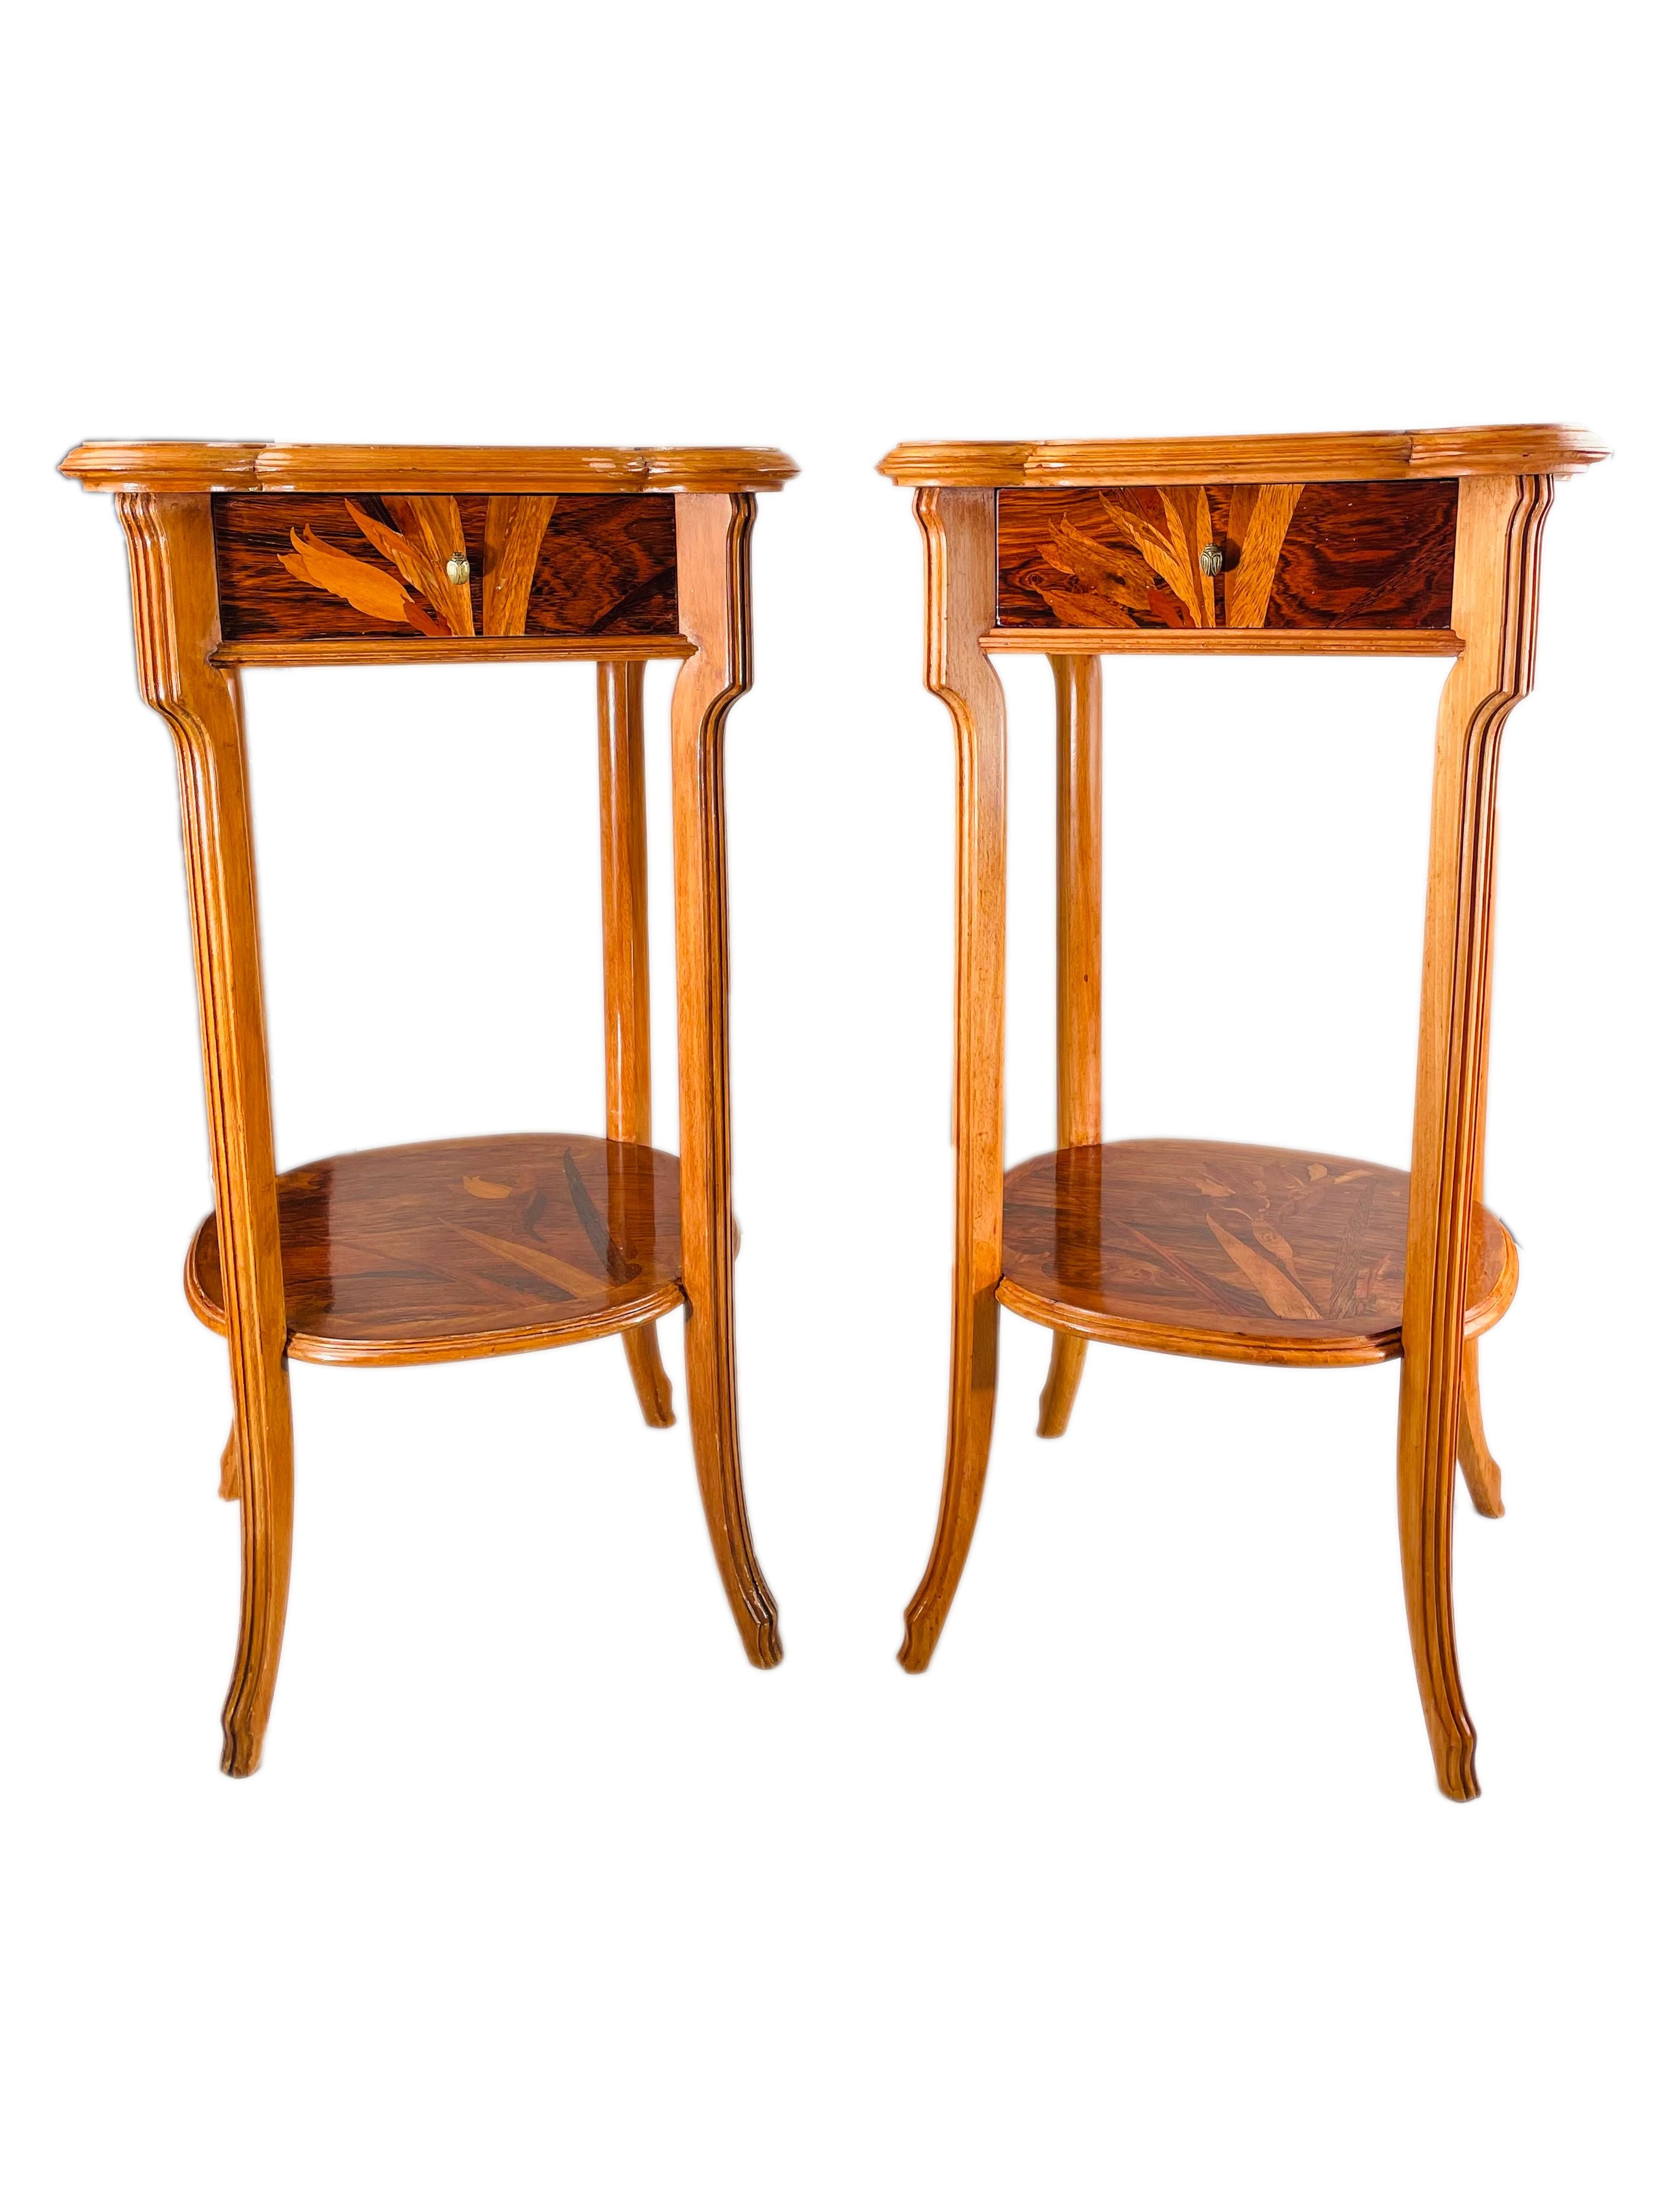 An early 20th century pair of French Art Nouveau occasional tables by, Emile Gallé carved legs further decorated with exotic wood marquetry inlay of flora on the top, drawers, sides, and lower shelf . The tables both have a single drawers each